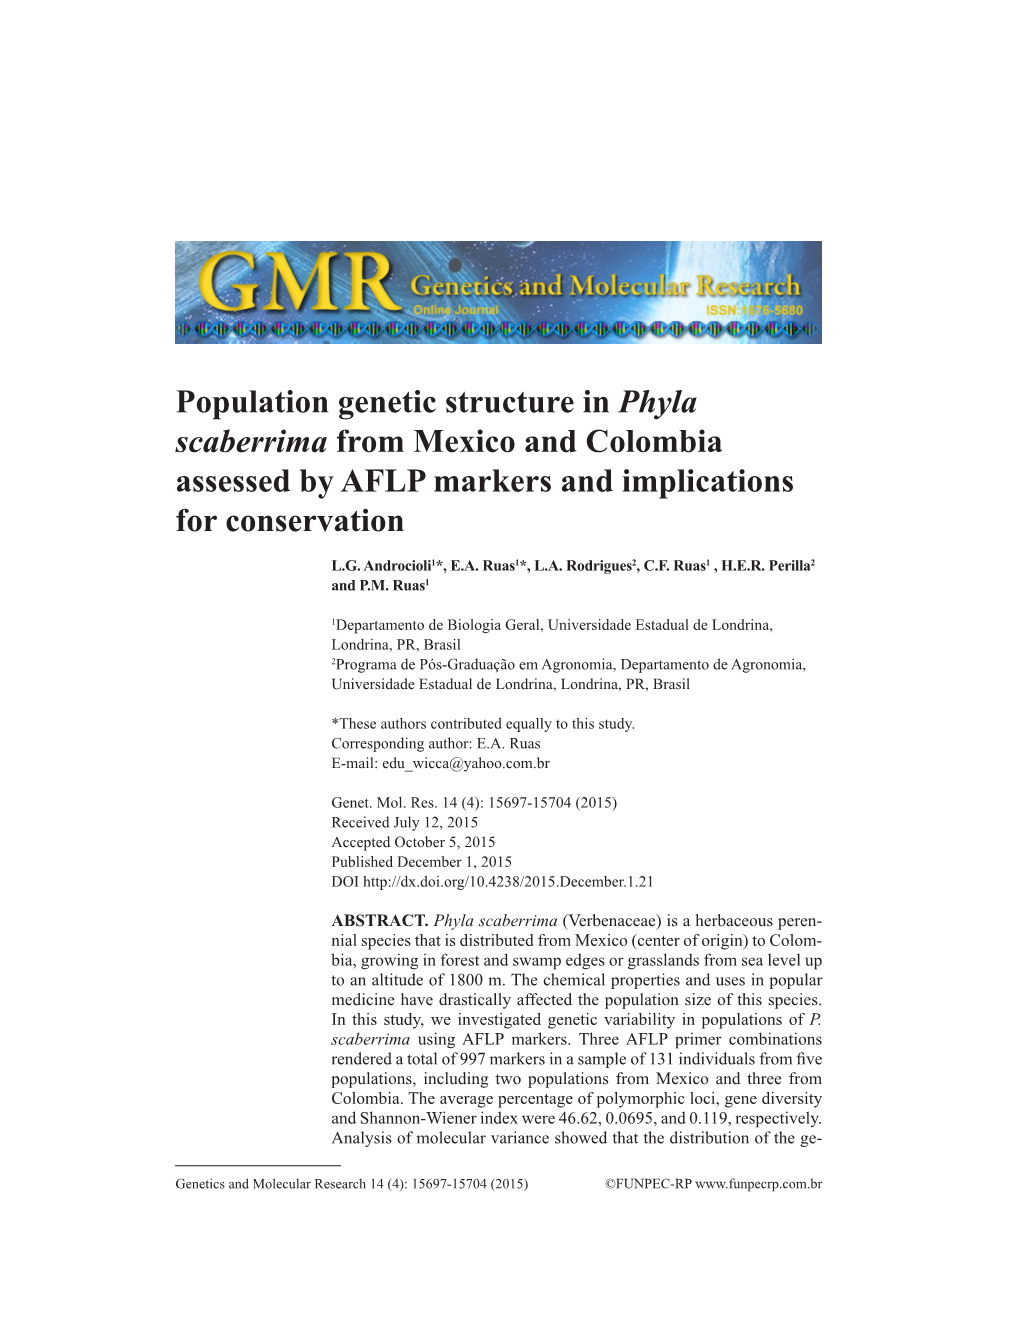 Population Genetic Structure in Phyla Scaberrima from Mexico and Colombia Assessed by AFLP Markers and Implications for Conservation